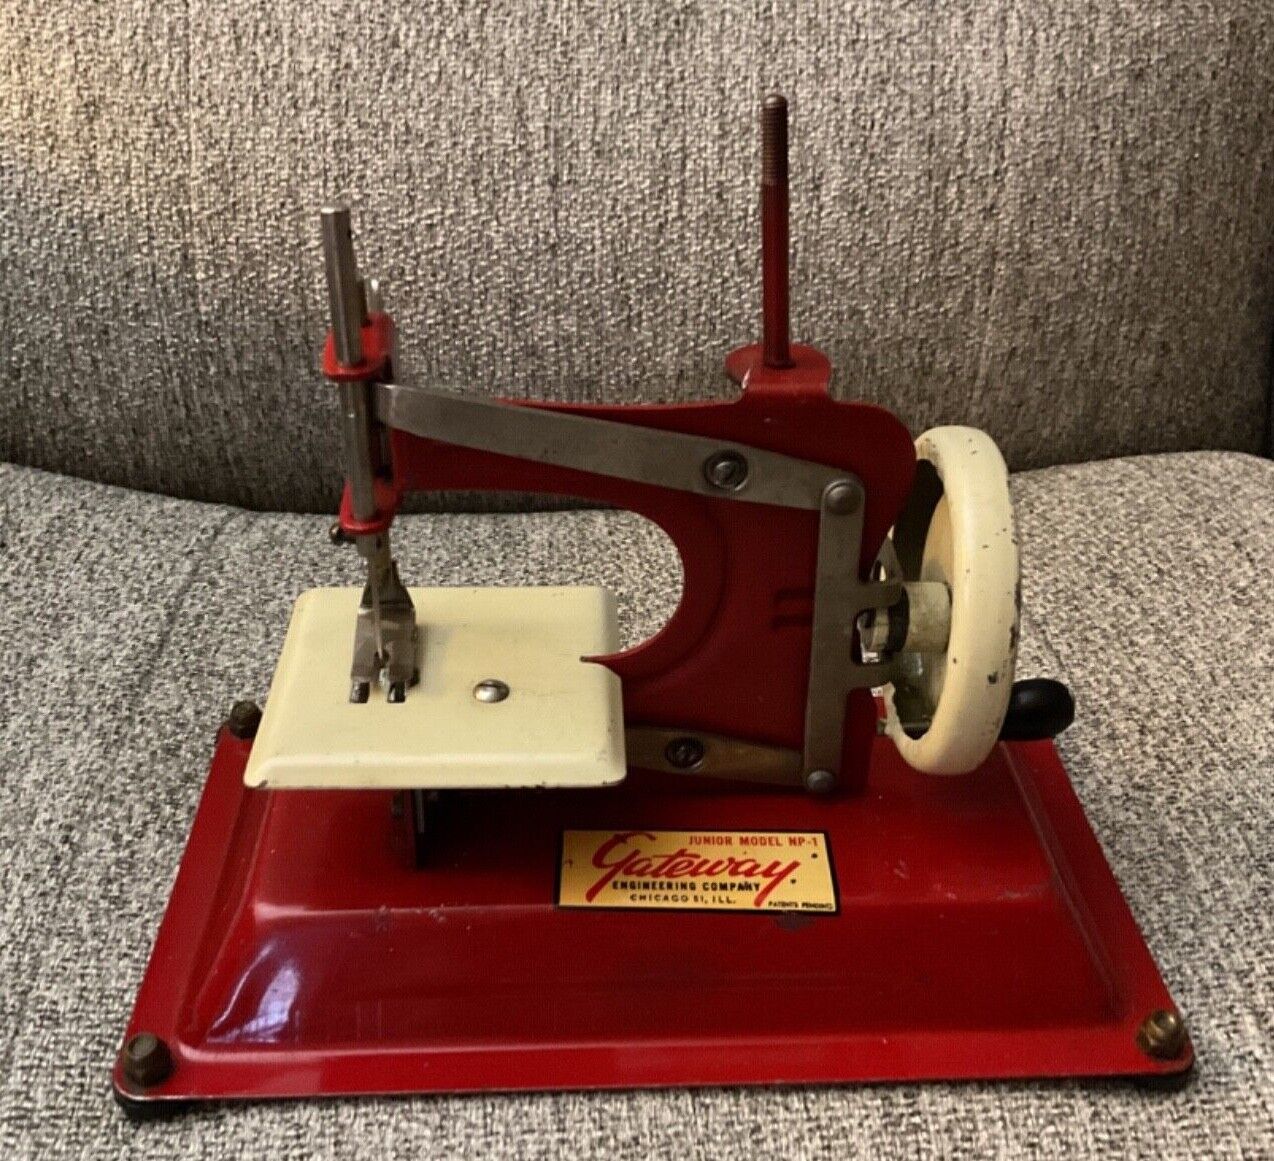 RARE  1920s Red Child Size Metal Sewing Machine Junior Model #NP-1 Collectible